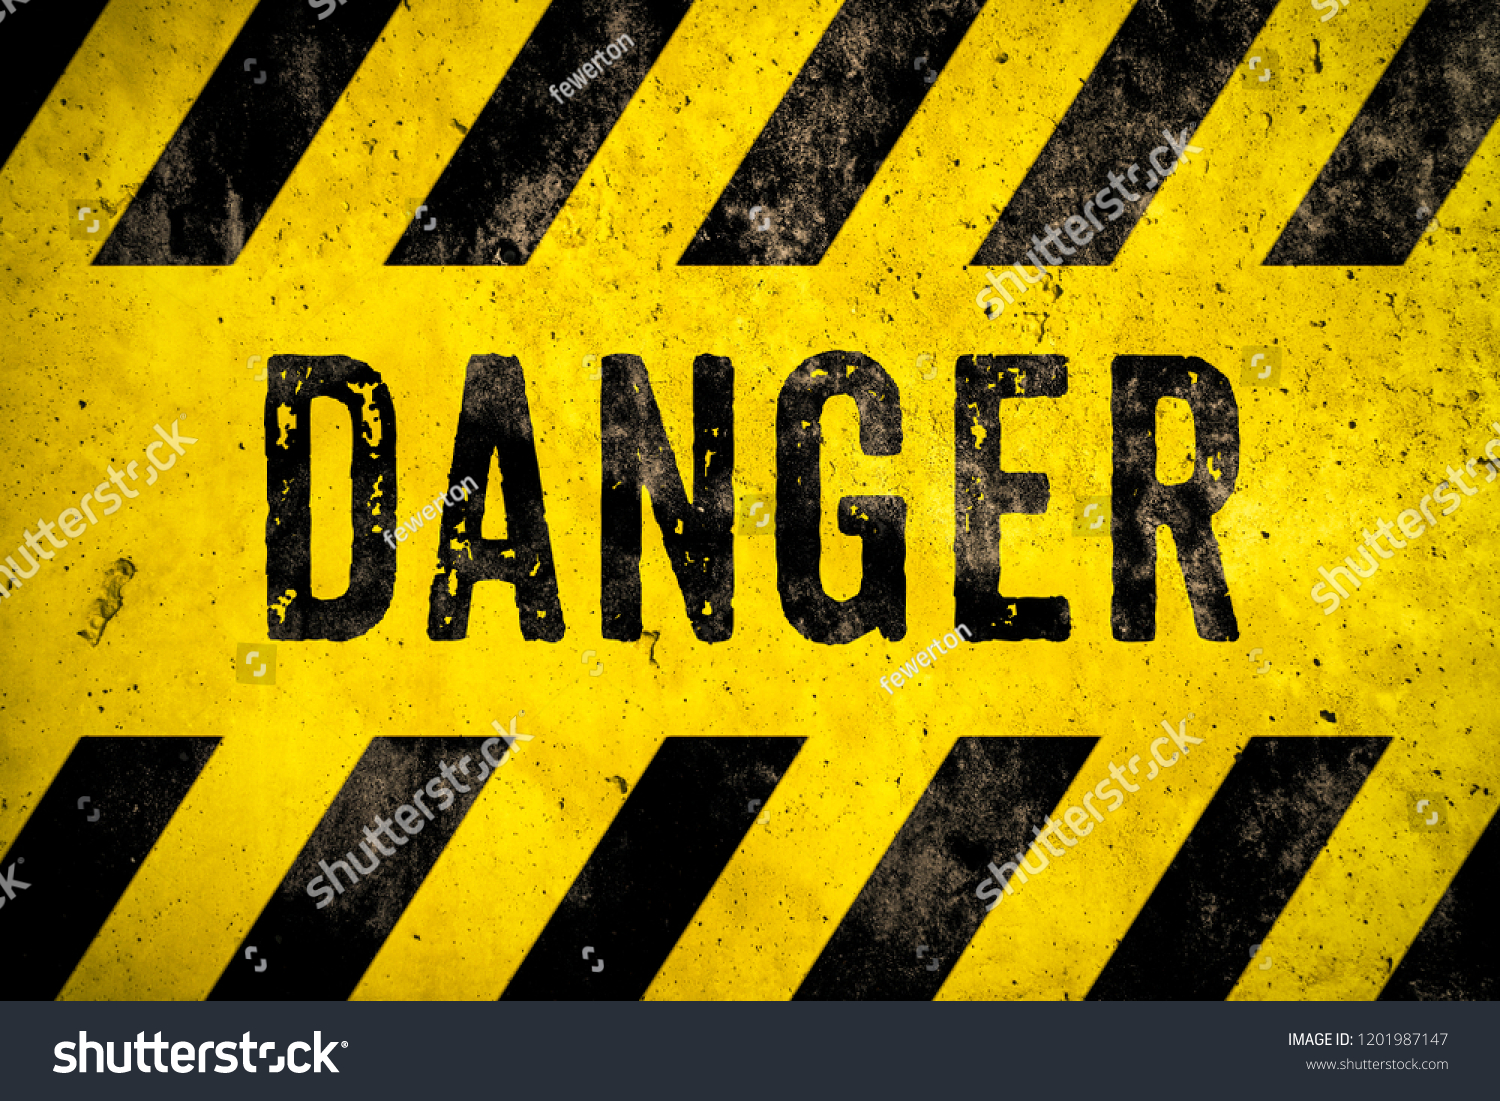 DANGER warning sign word text as stencil with yellow and black stripes painted over concrete wall cement texture background. Concept image for caution, dangerous area and hazard. #1201987147